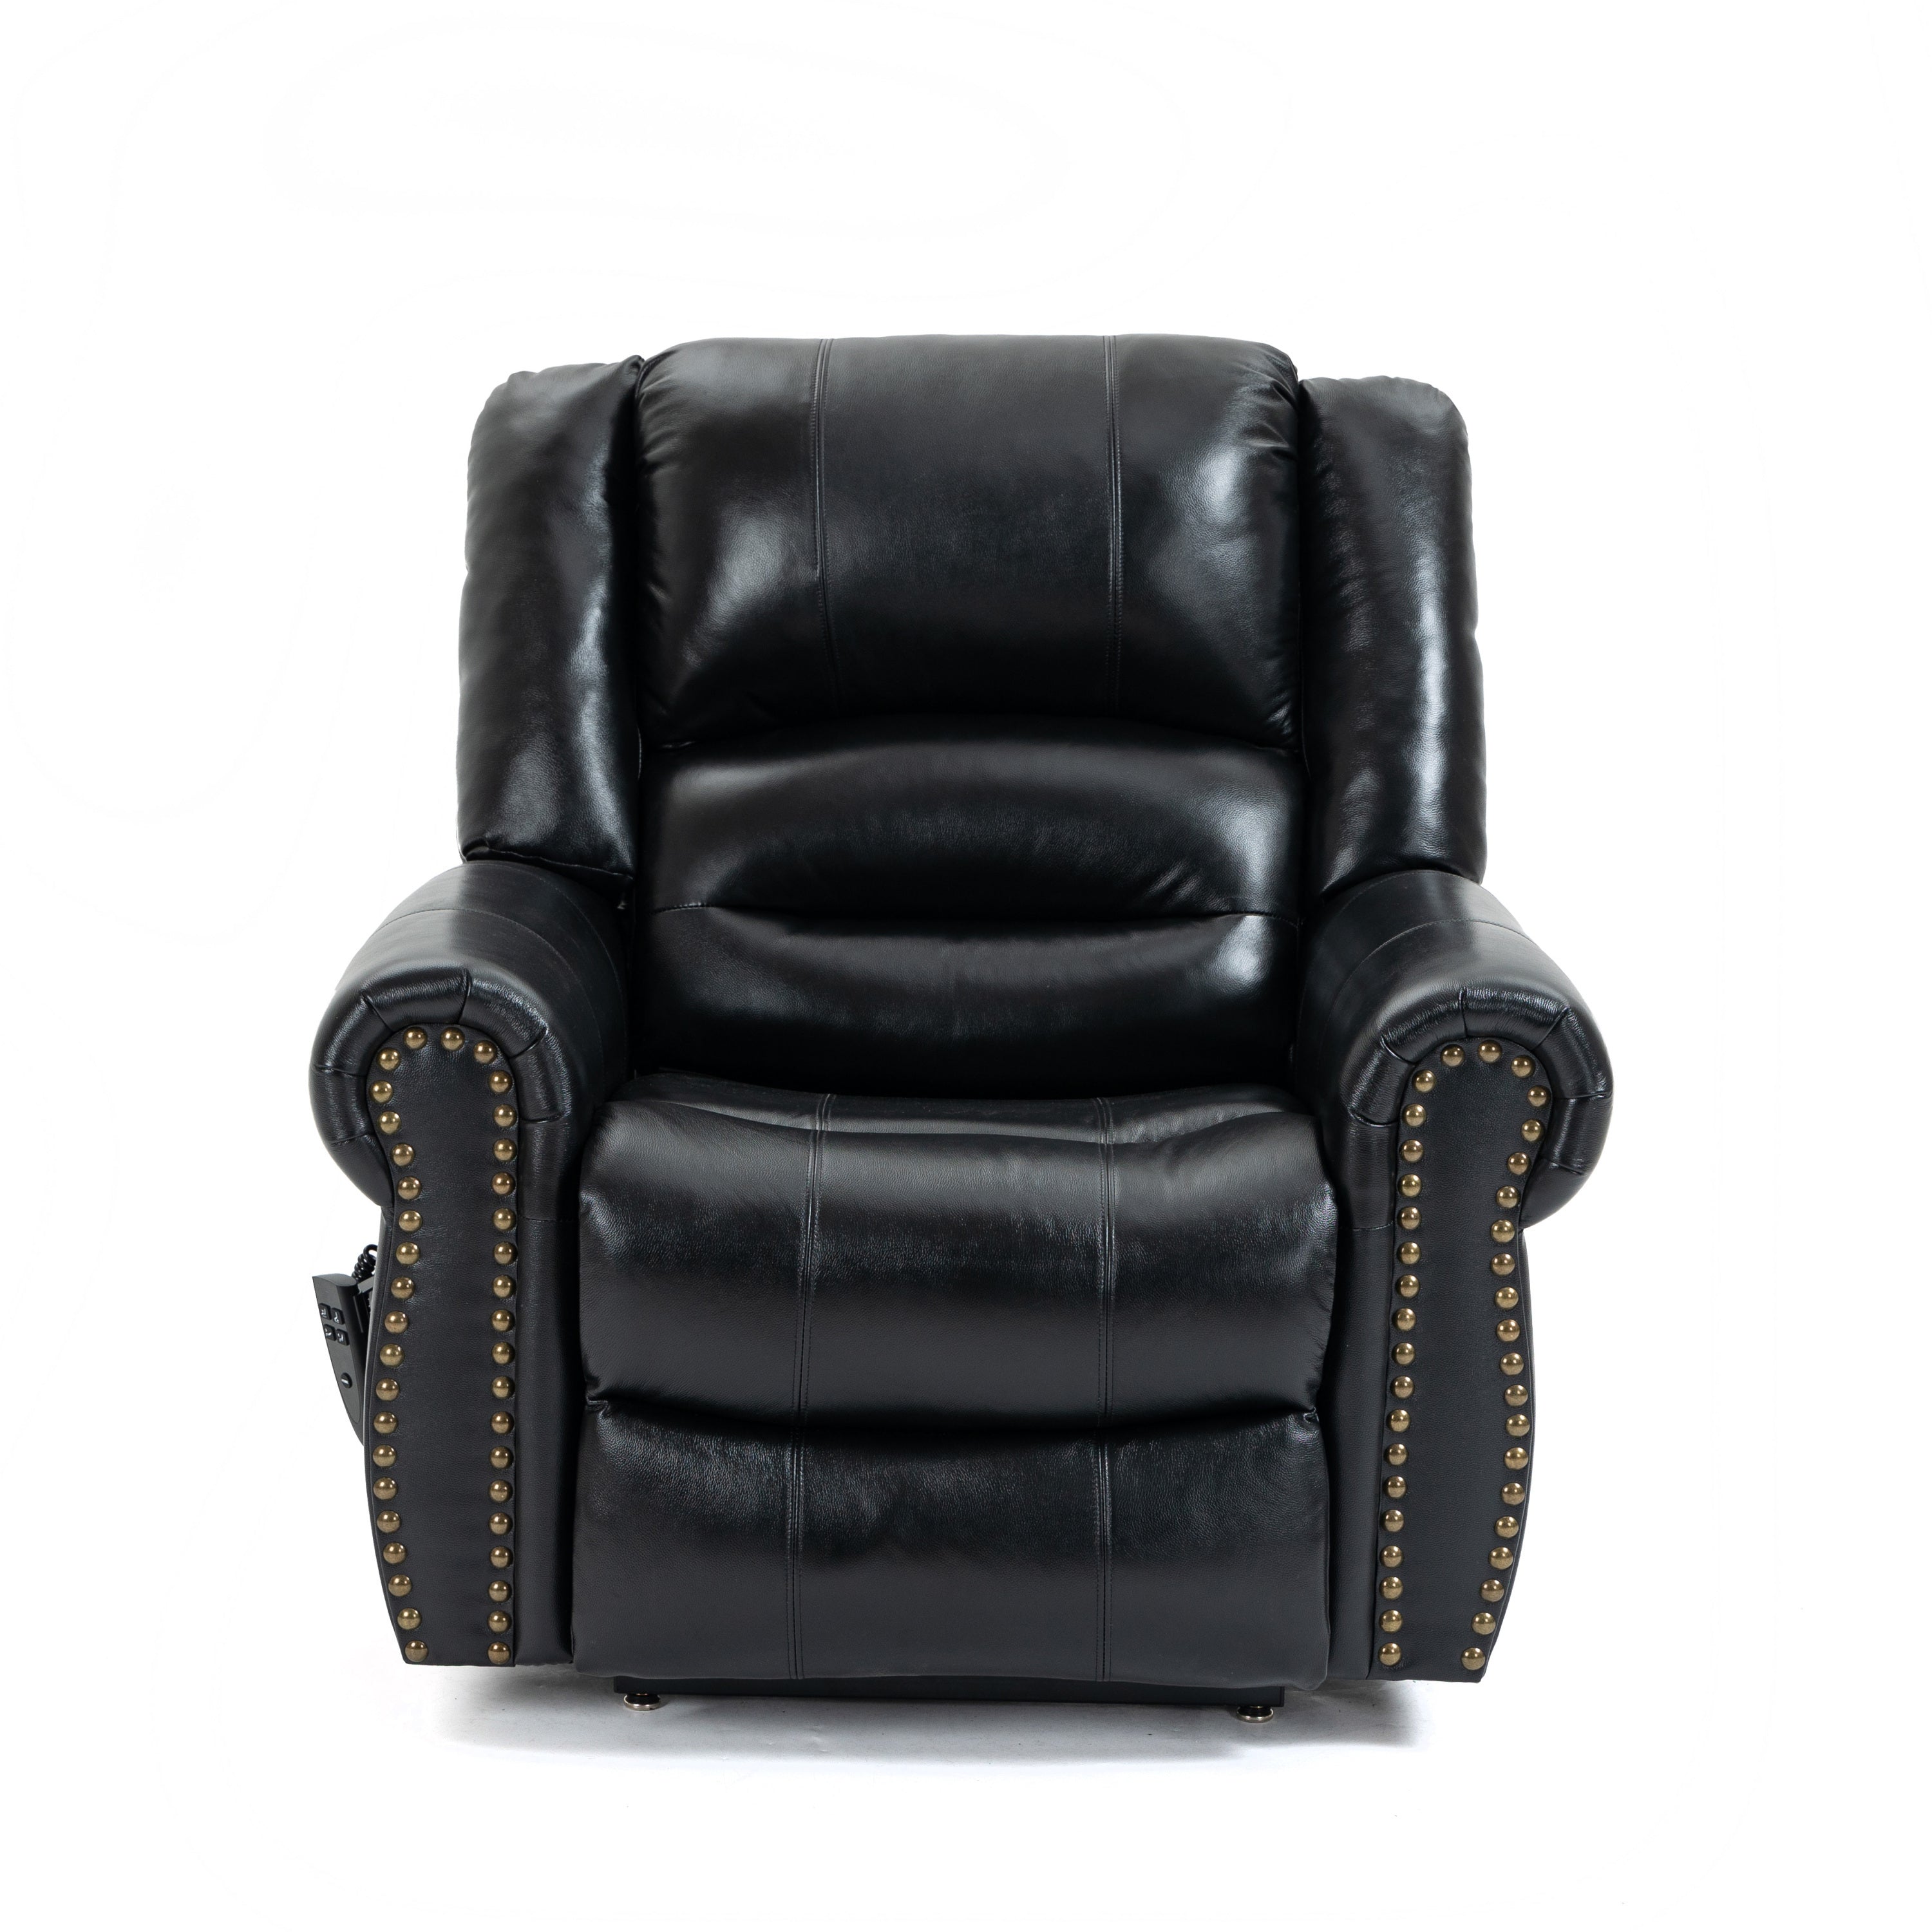 Genuine Leather Power Lift Recliner Chair with Heat, Massage and Infinite Positioning, seated front view